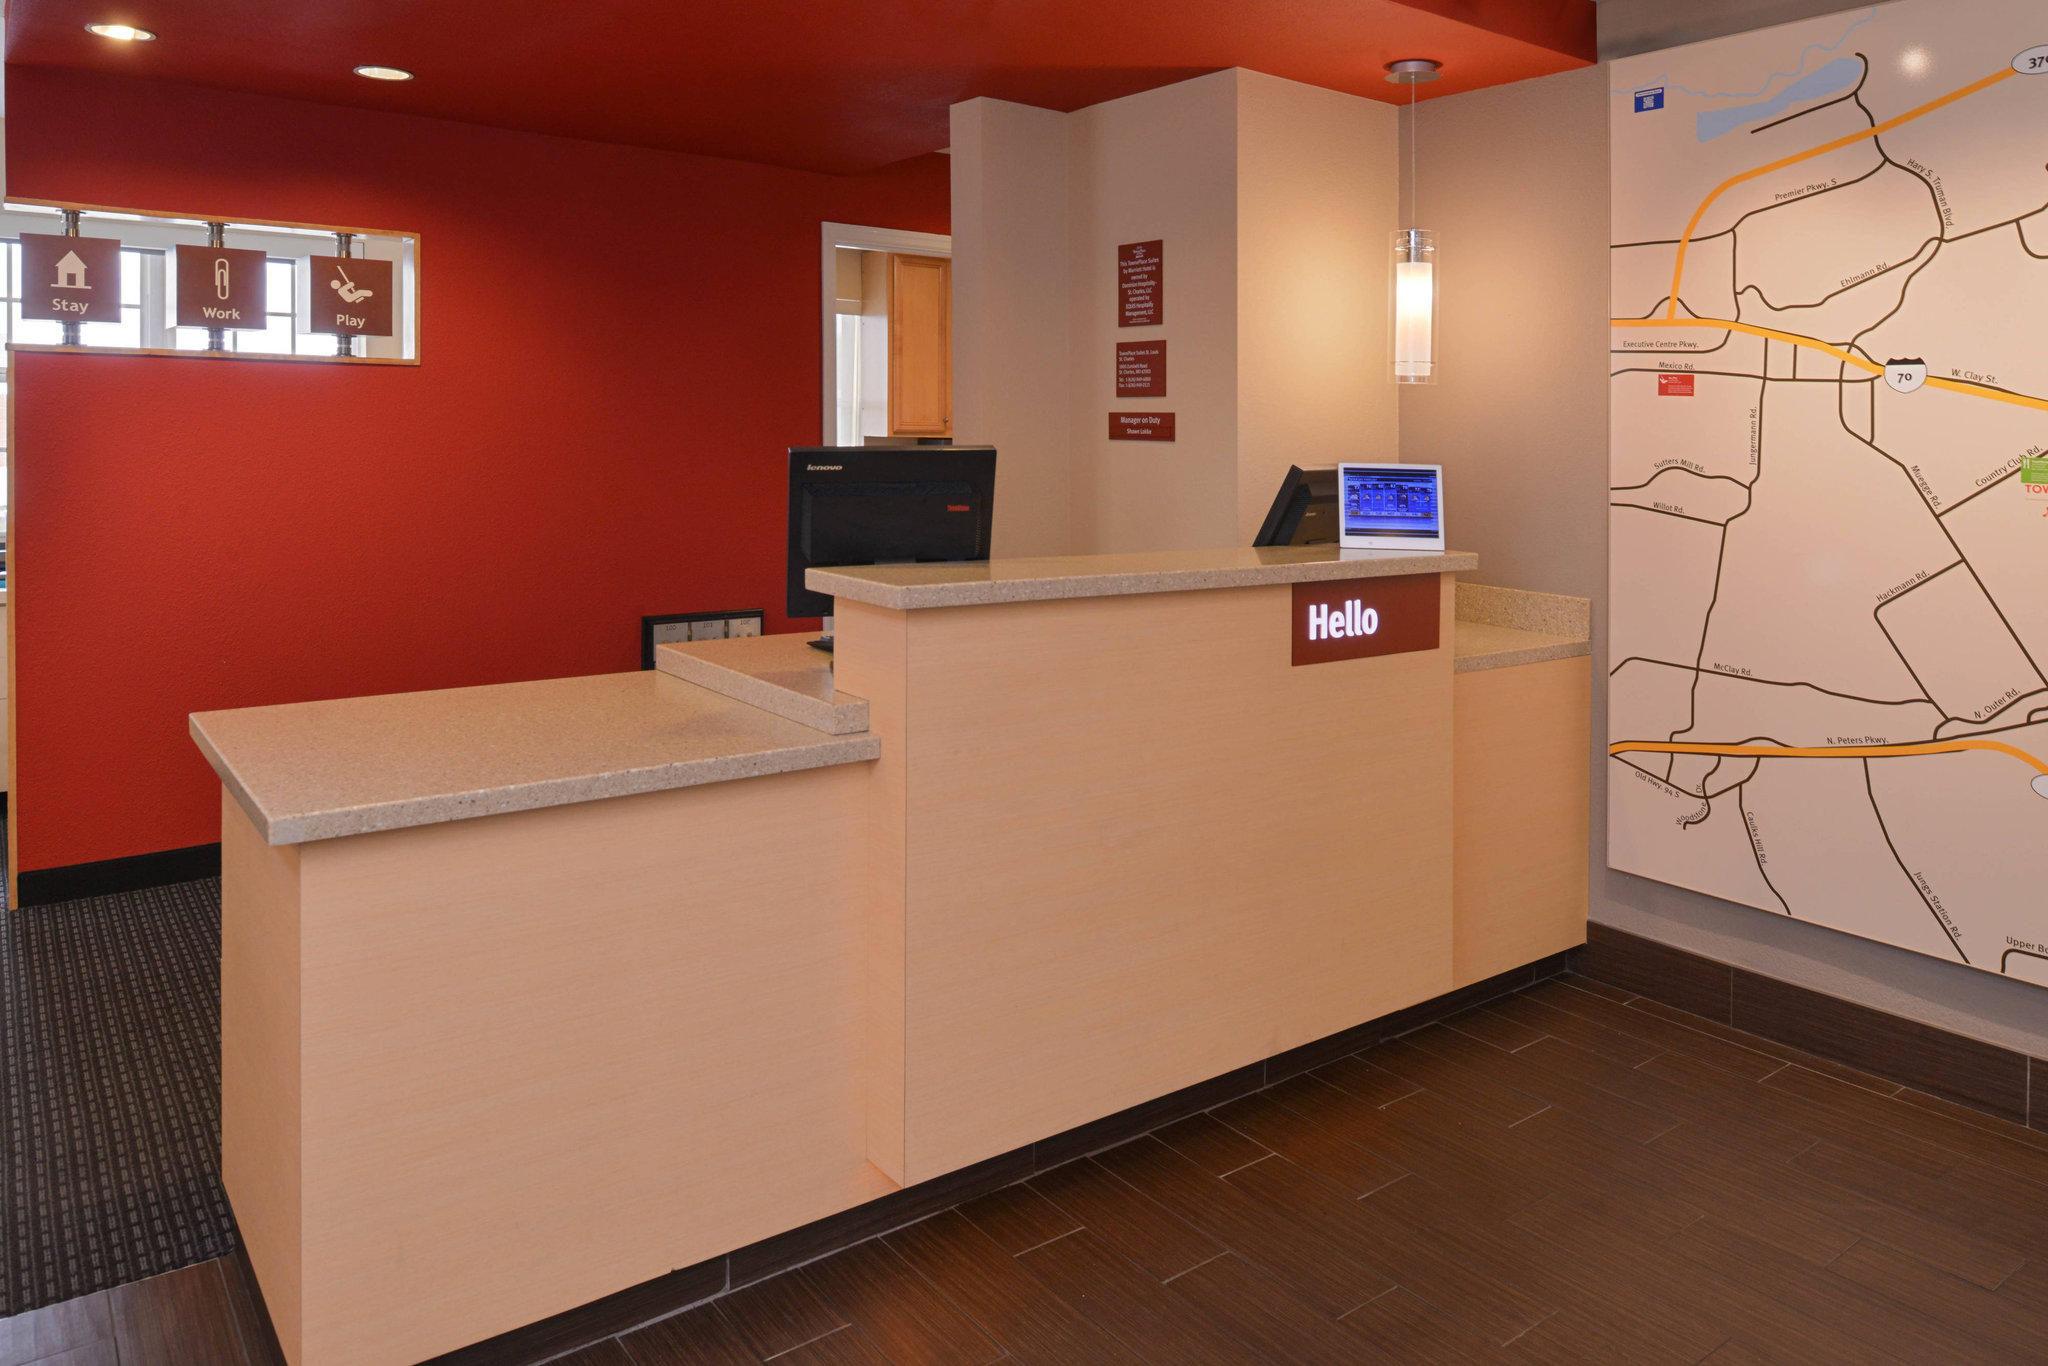 TownePlace Suites by Marriott St. Louis St. Charles Photo